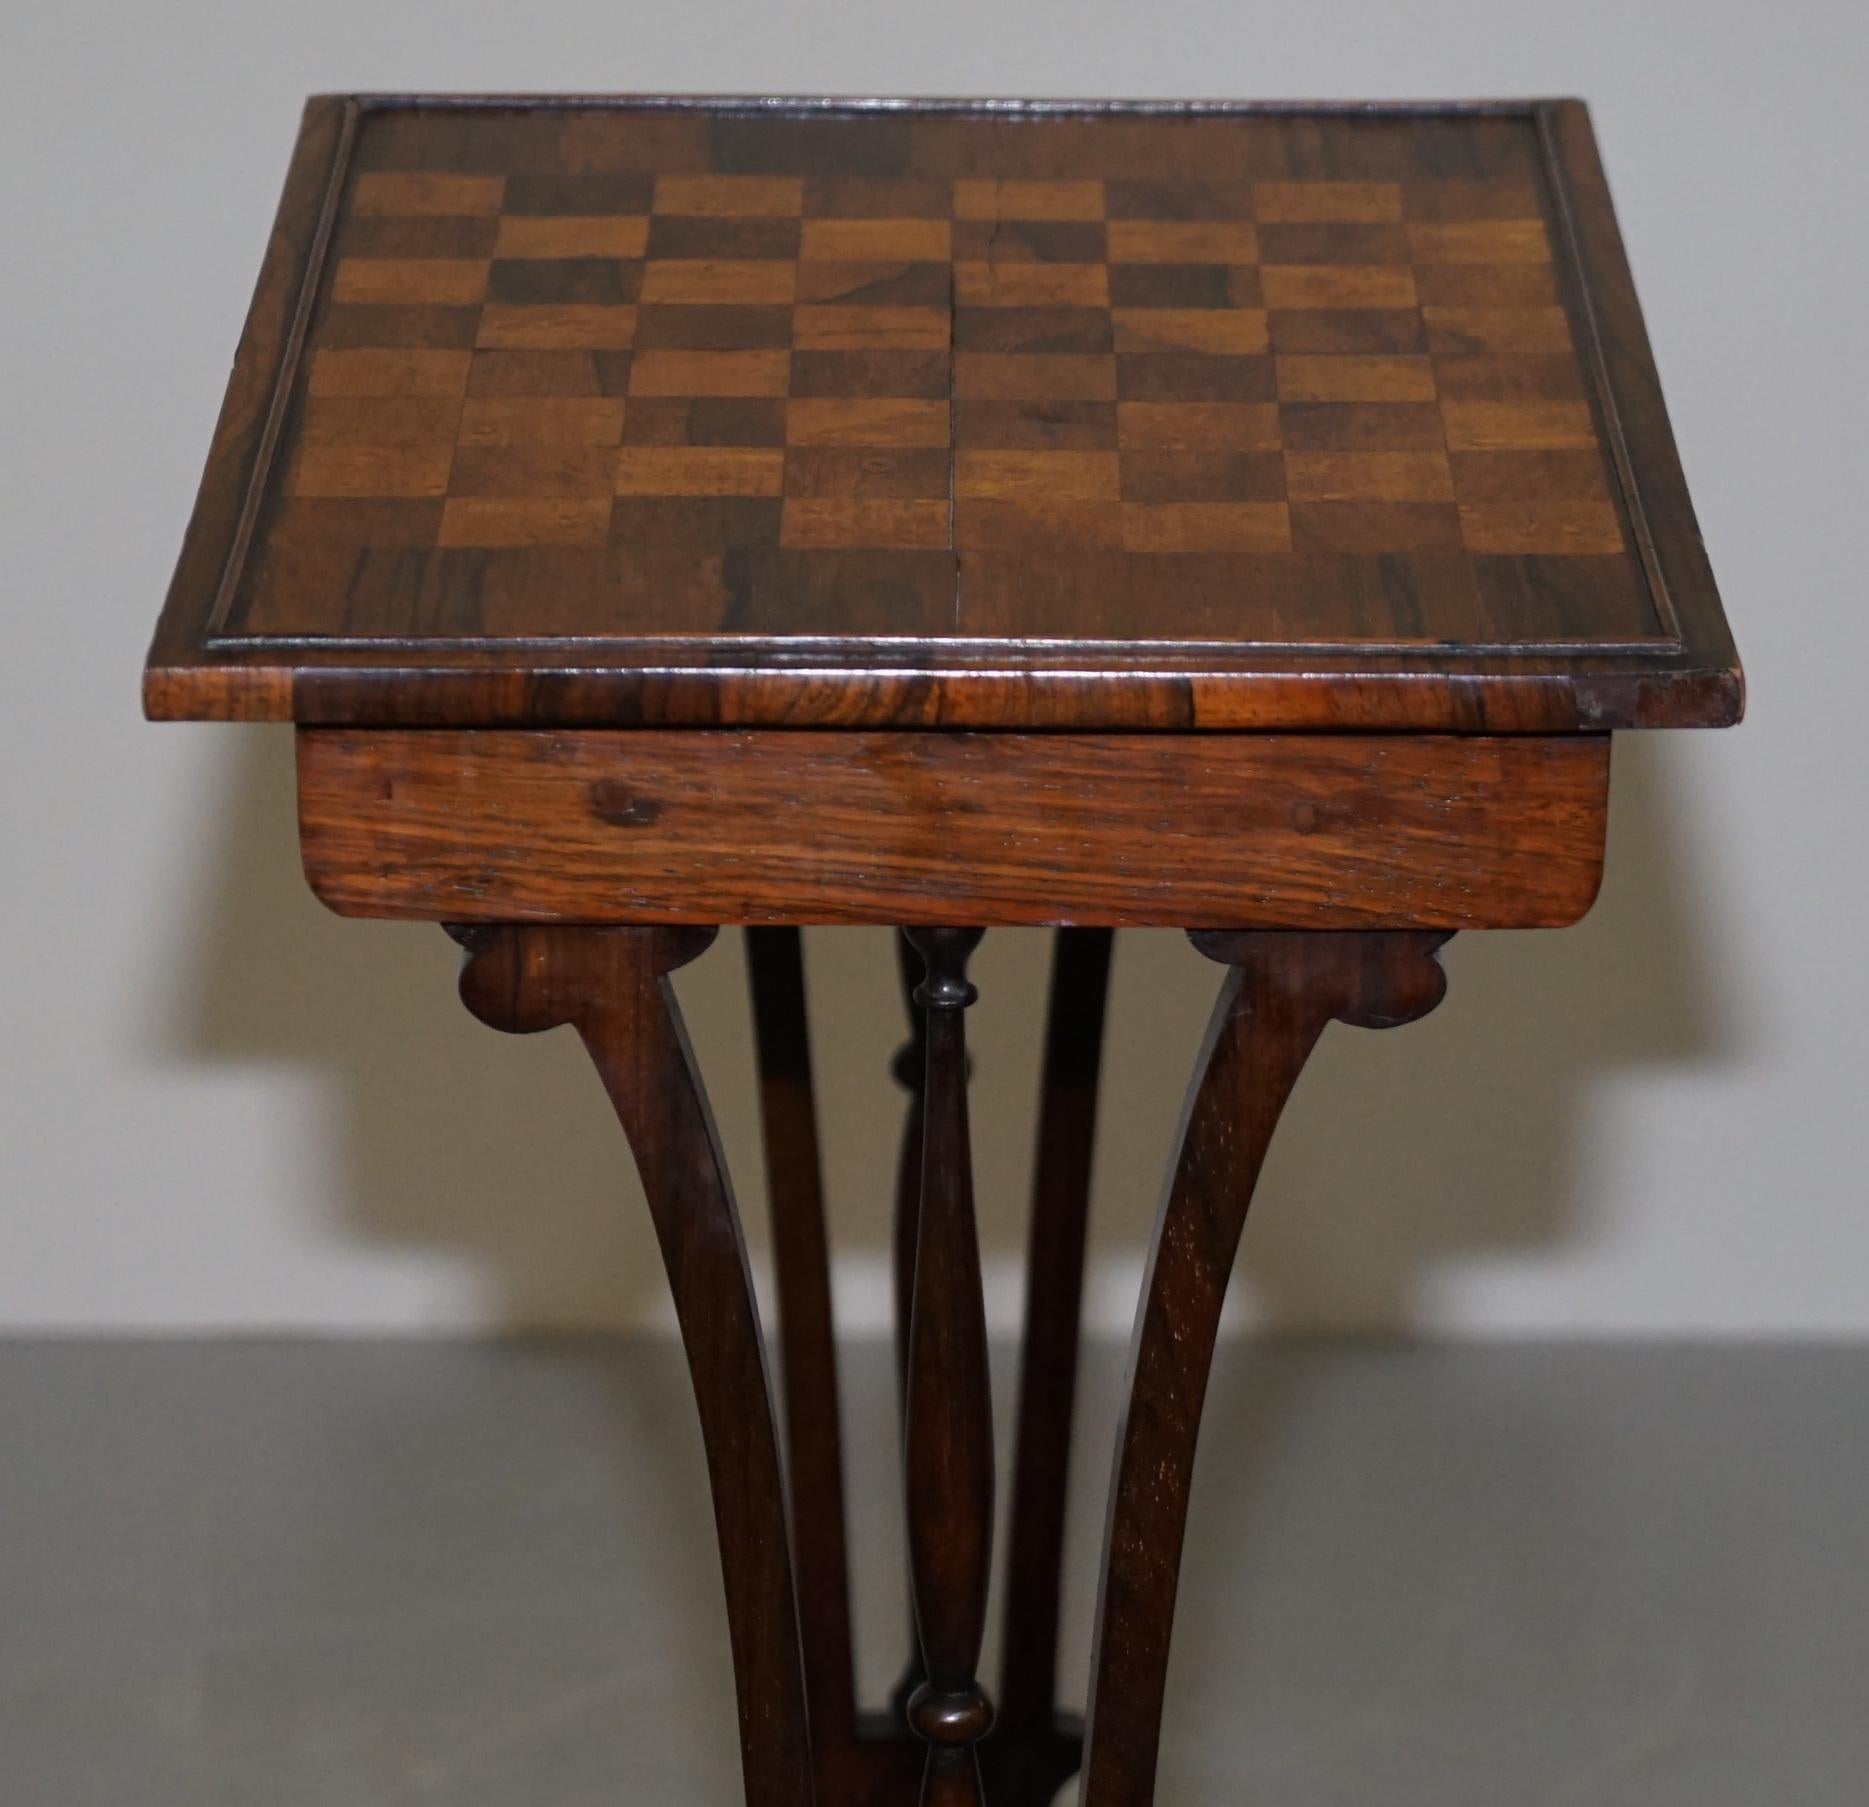 Fine Regency Nest of Hardwood Tables with Chessboard Top Attributed to Gillows For Sale 5